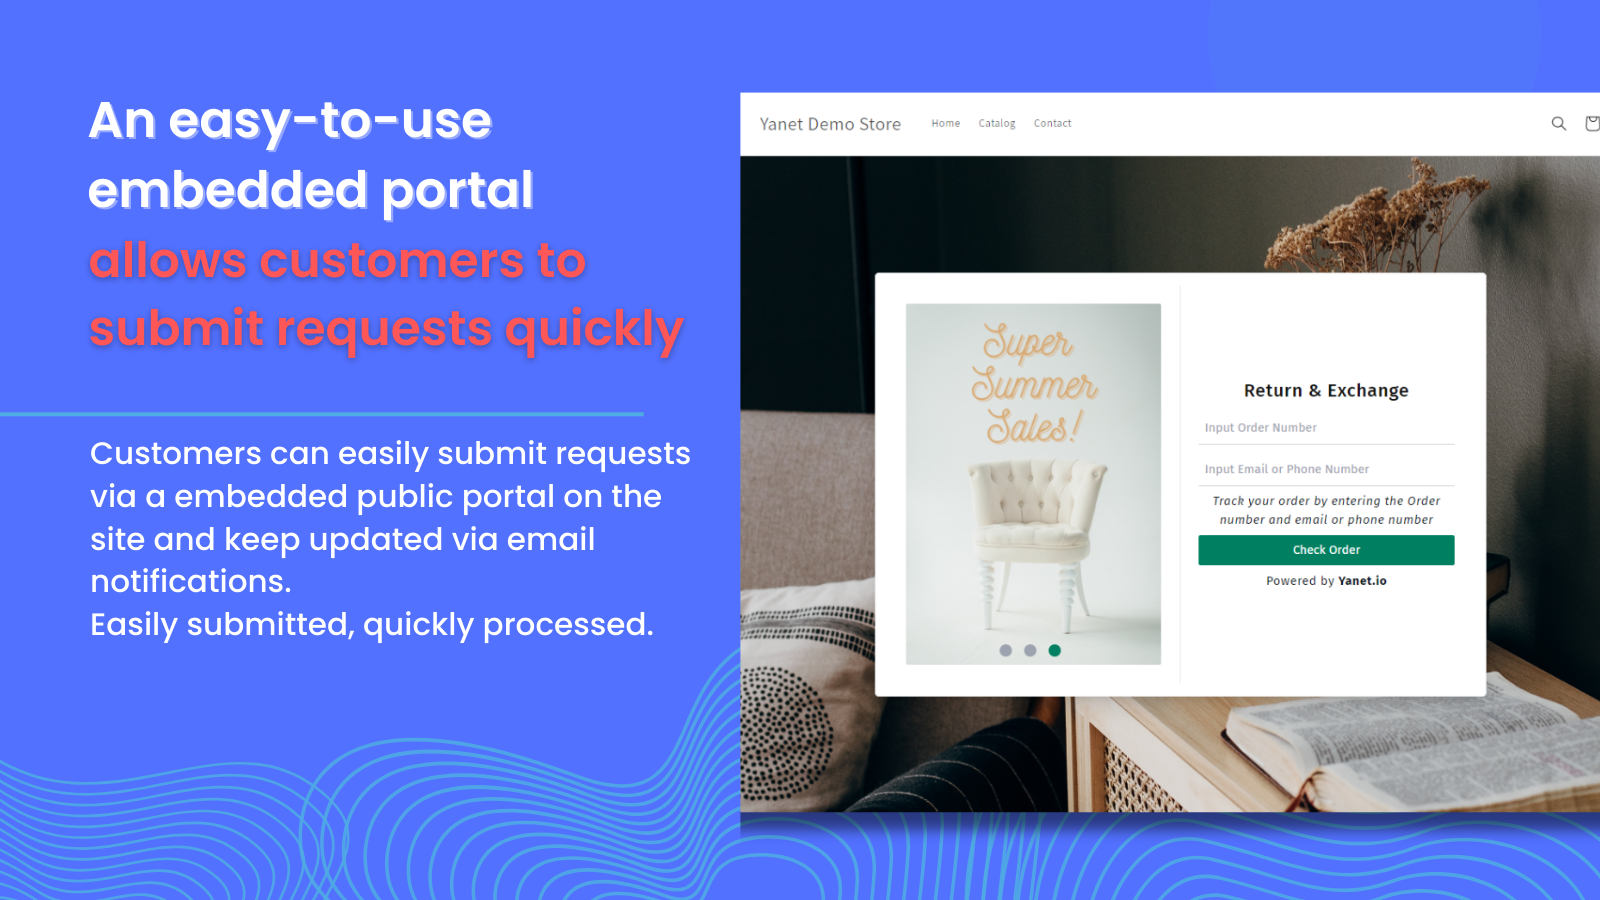 Easy-to-use embedded portal allows customers to submit requests